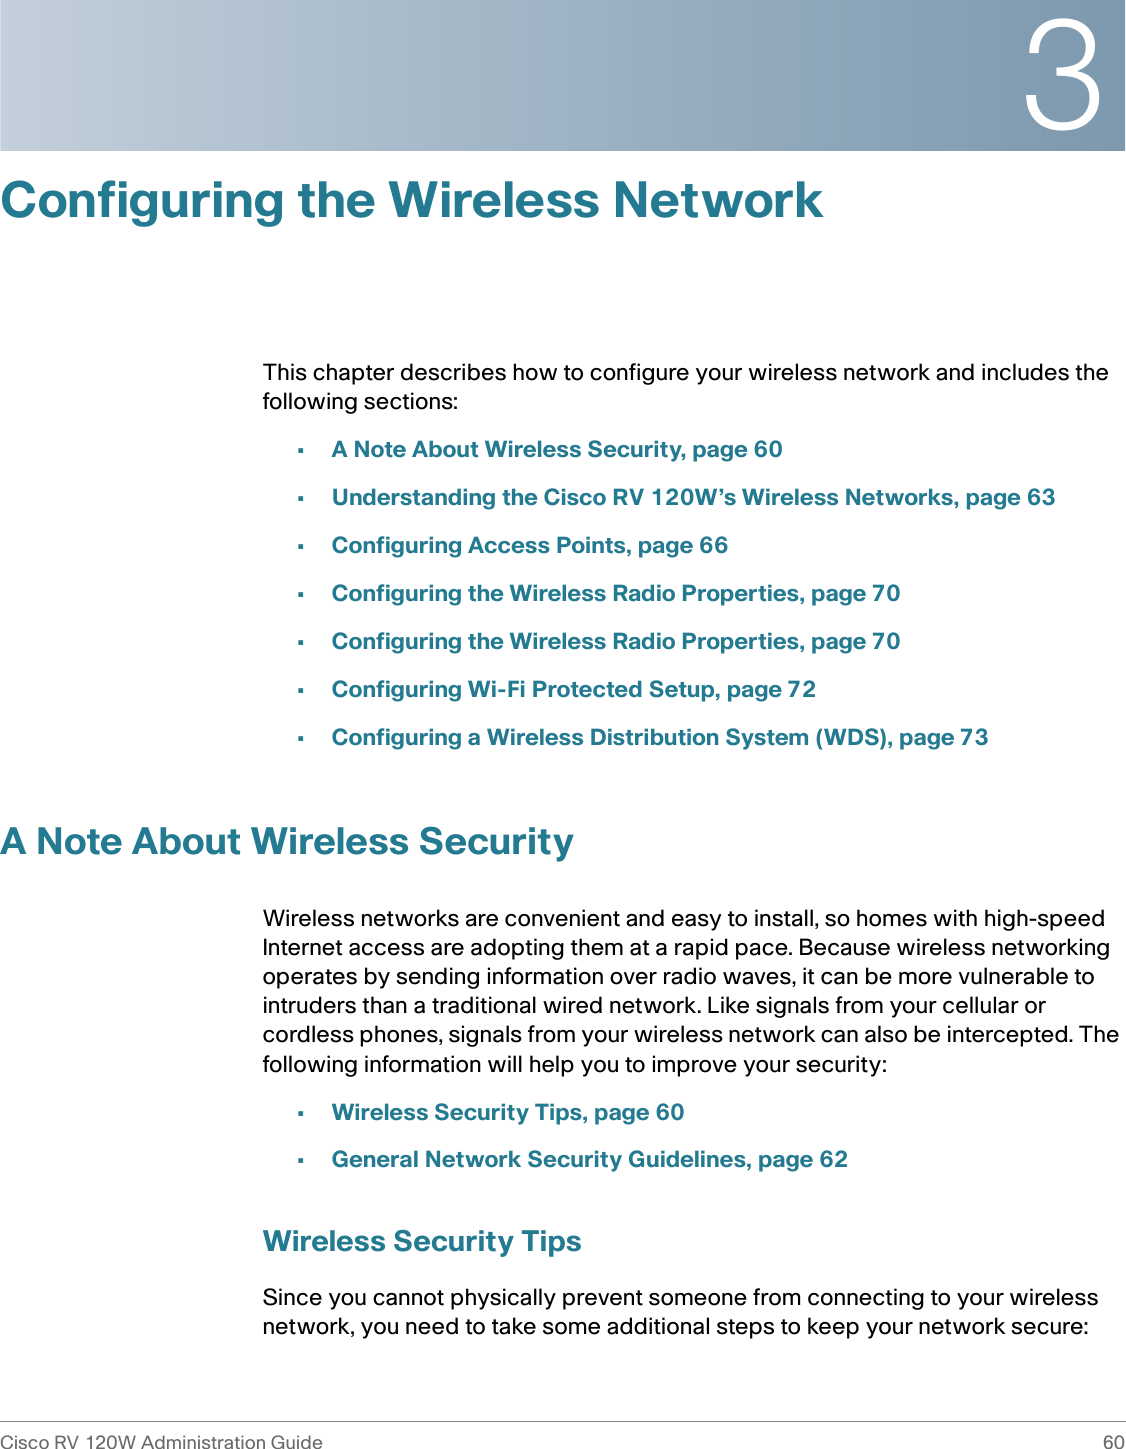 3Cisco RV 120W Administration Guide 60 Configuring the Wireless NetworkThis chapter describes how to configure your wireless network and includes the following sections:•A Note About Wireless Security, page 60•Understanding the Cisco RV 120W’s Wireless Networks, page 63•Configuring Access Points, page 66•Configuring the Wireless Radio Properties, page 70•Configuring the Wireless Radio Properties, page 70•Configuring Wi-Fi Protected Setup, page 72•Configuring a Wireless Distribution System (WDS), page 73A Note About Wireless SecurityWireless networks are convenient and easy to install, so homes with high-speed Internet access are adopting them at a rapid pace. Because wireless networking operates by sending information over radio waves, it can be more vulnerable to intruders than a traditional wired network. Like signals from your cellular or cordless phones, signals from your wireless network can also be intercepted. The following information will help you to improve your security:•Wireless Security Tips, page 60•General Network Security Guidelines, page 62Wireless Security TipsSince you cannot physically prevent someone from connecting to your wireless network, you need to take some additional steps to keep your network secure: